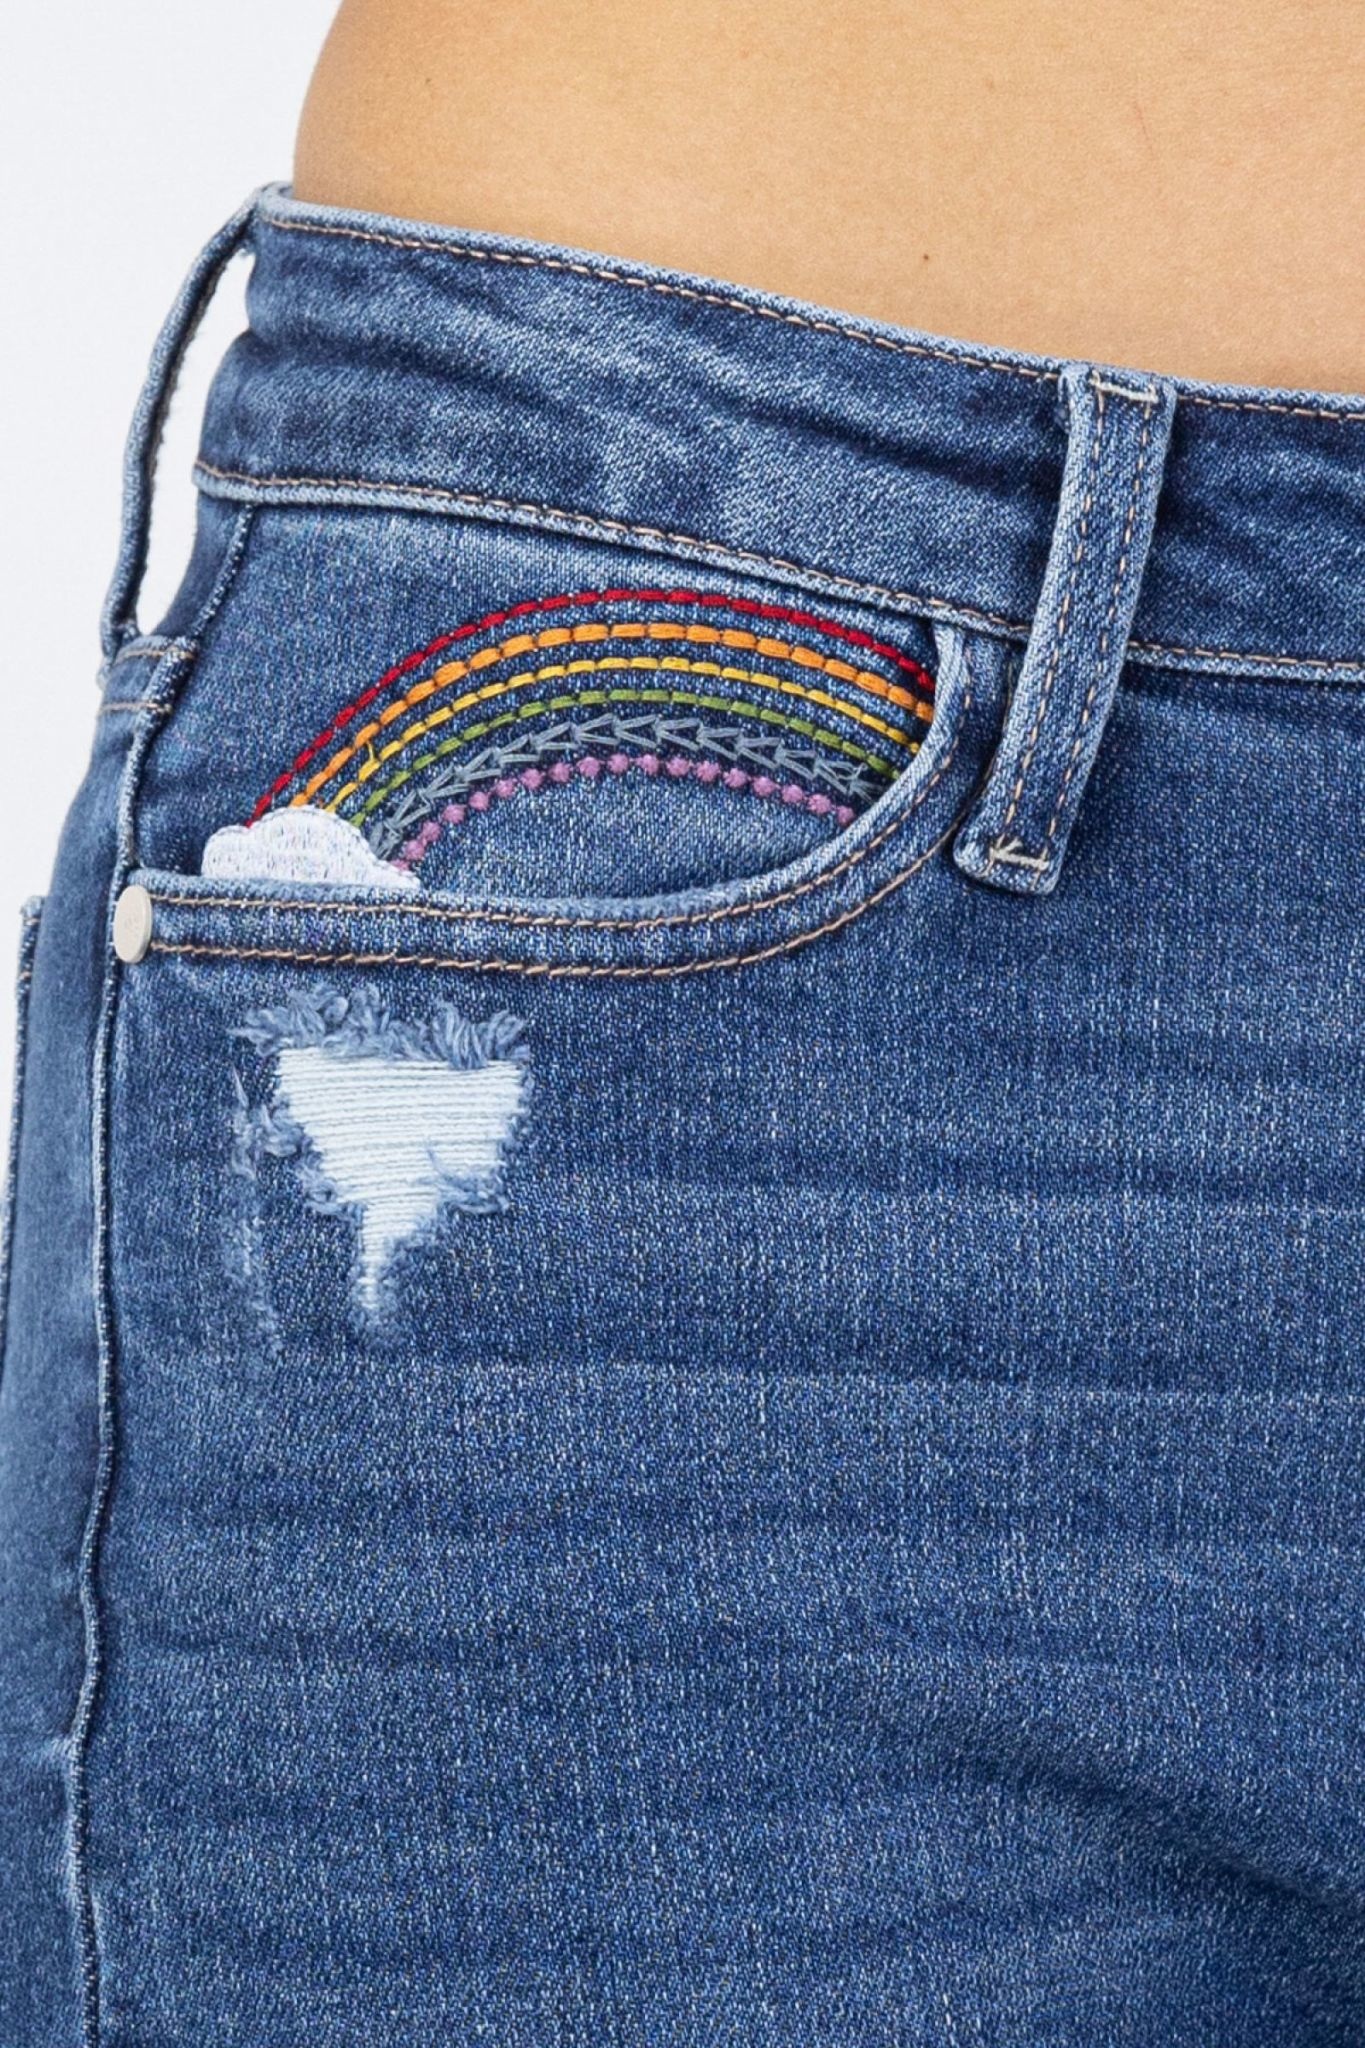 HI-Rise Rainbow Embroidery Crop Jeans - Casual 2 Dressy Women's Clothing